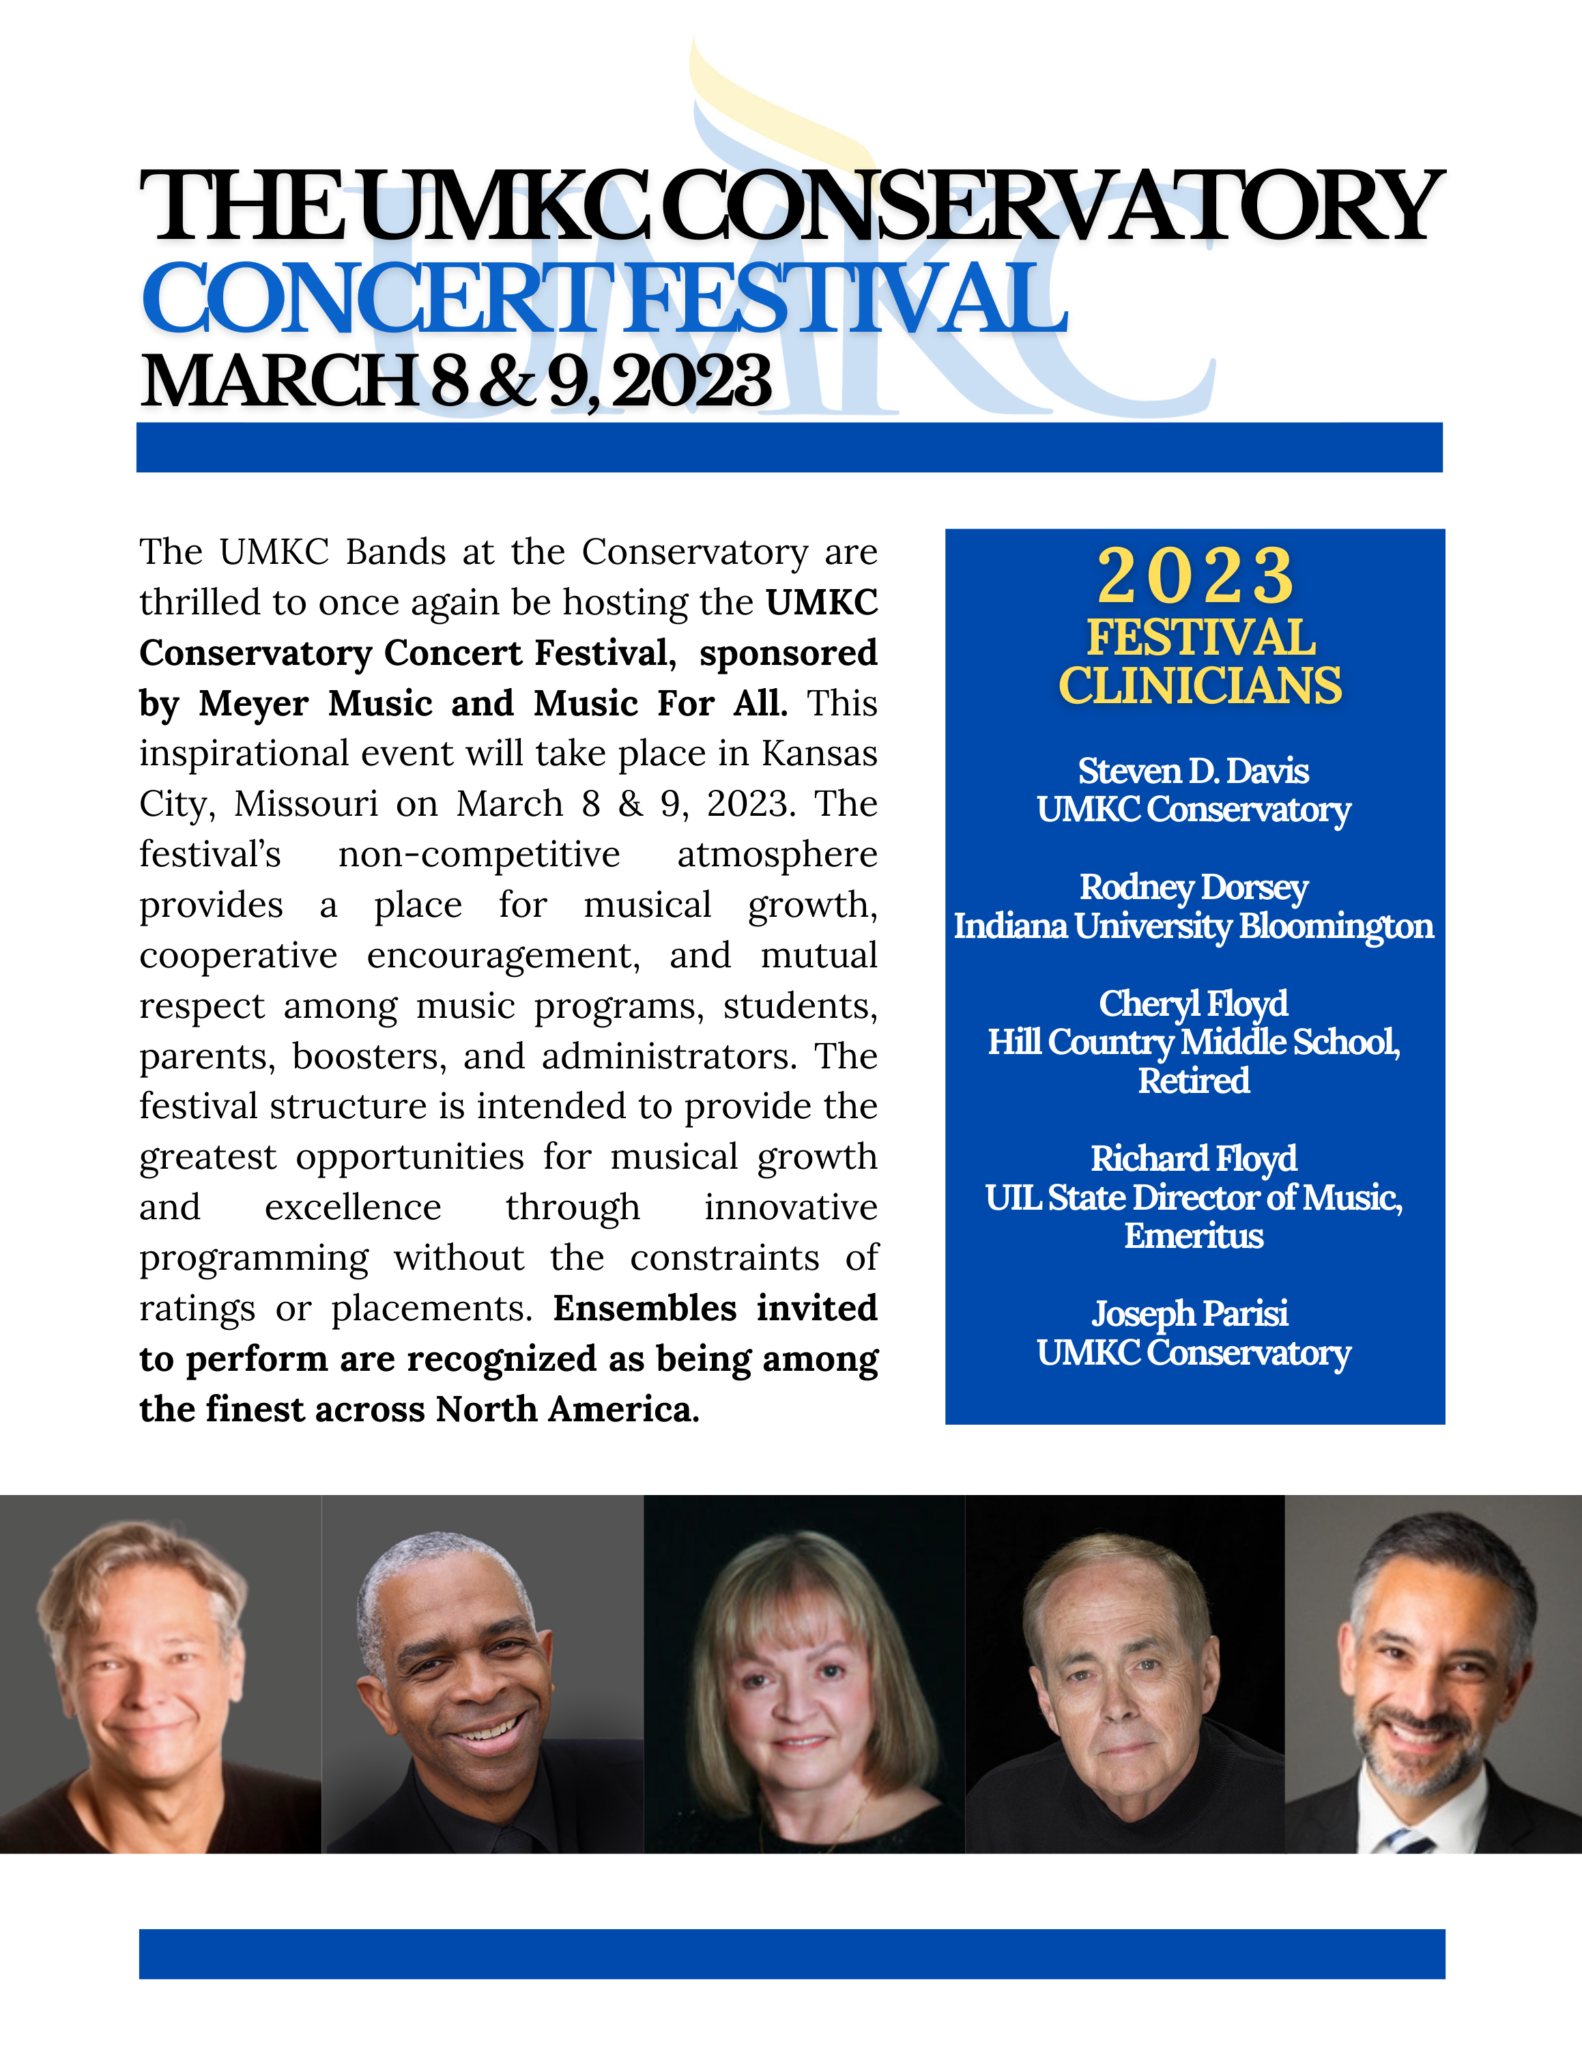 UMKC Conservatory Concert Festival March 8 & 9, 2023 Sponsored by